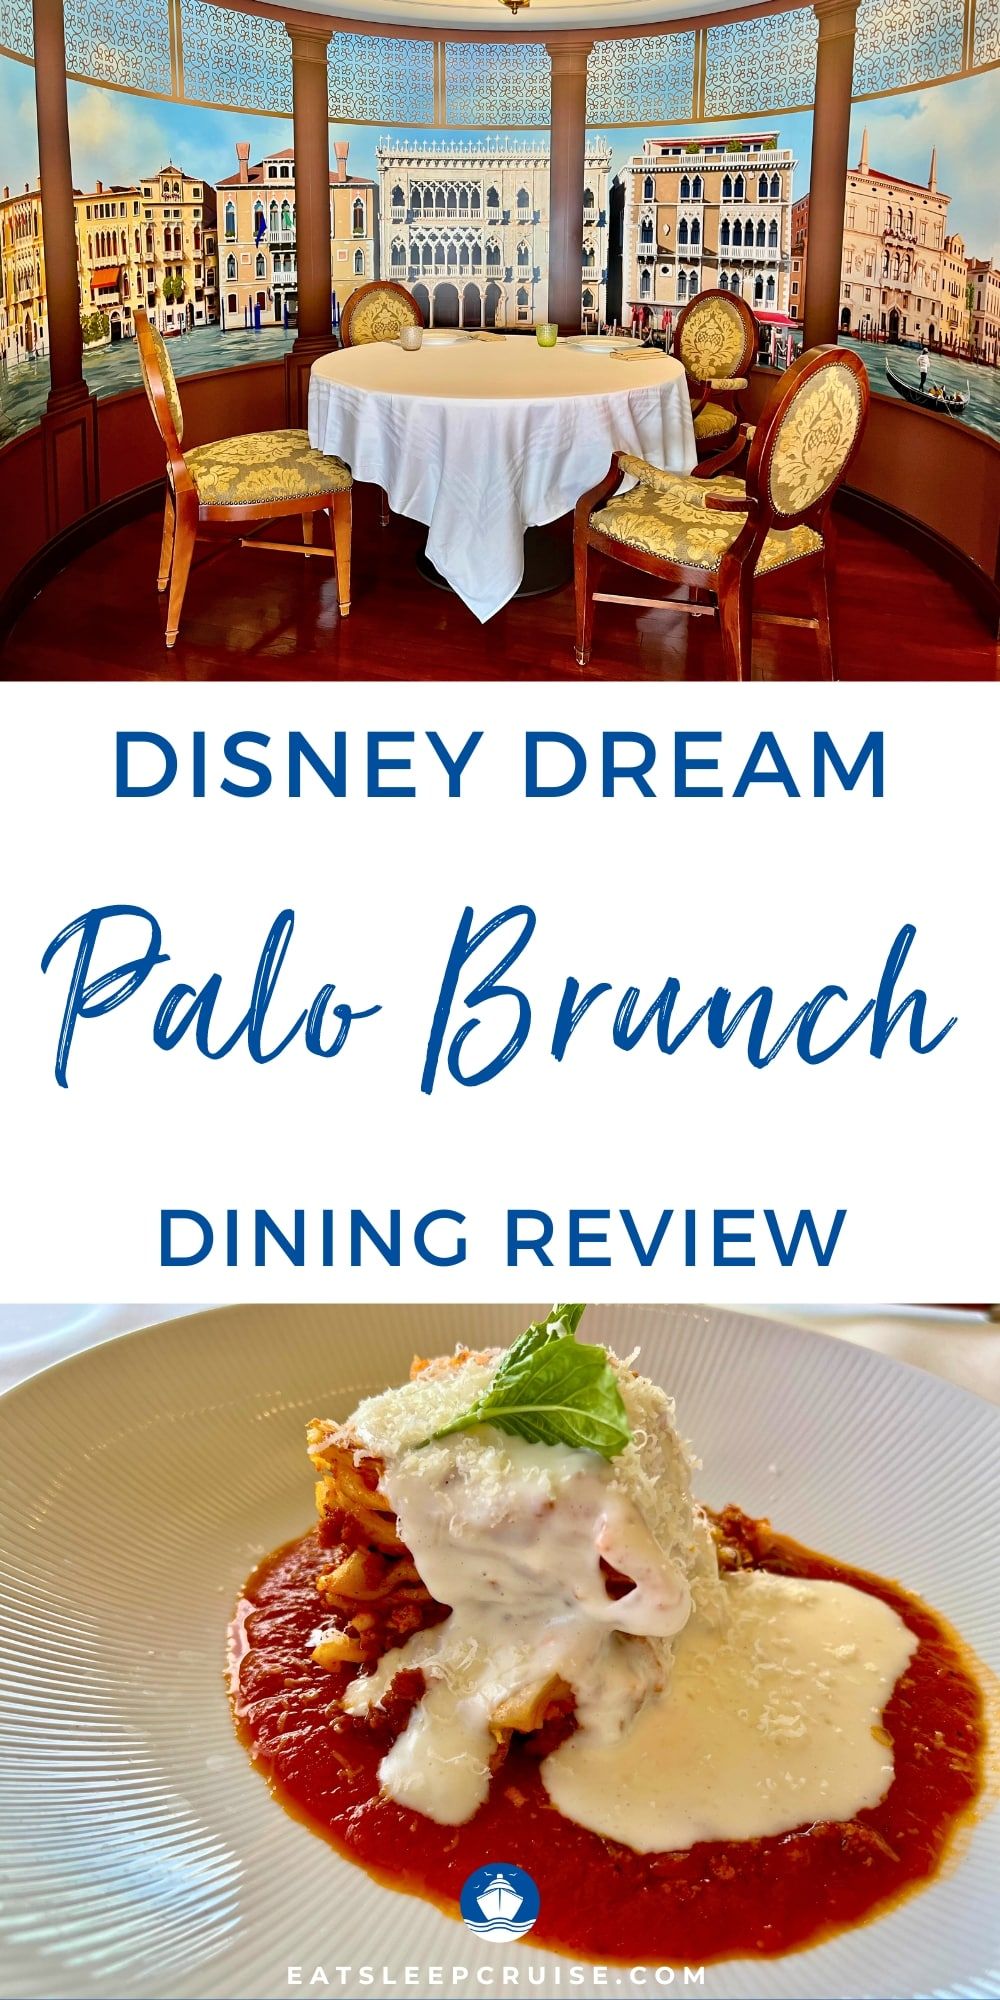 Is Palo Brunch on Disney Dream Worth the Upcharge?